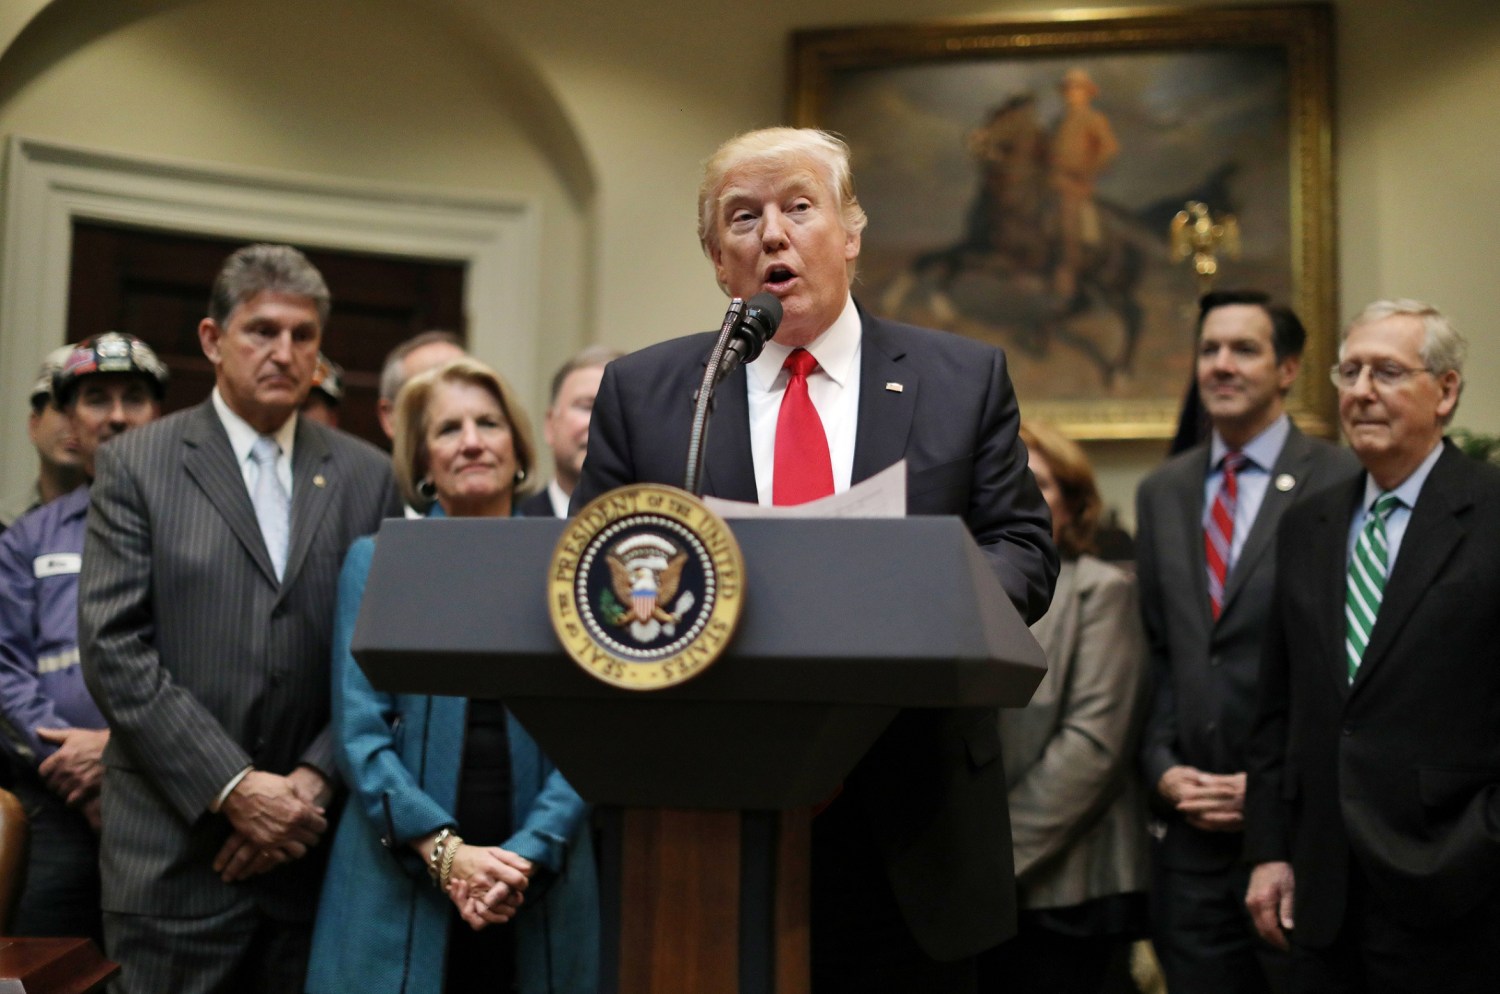 U.S. President Donald Trump speaks during the signing of H.J. Resolution 38, nullfies the stream protection rule, at the White House in Washington, U.S., February 16, 2017. REUTERS/Carlos Barria - RTSZ1RF